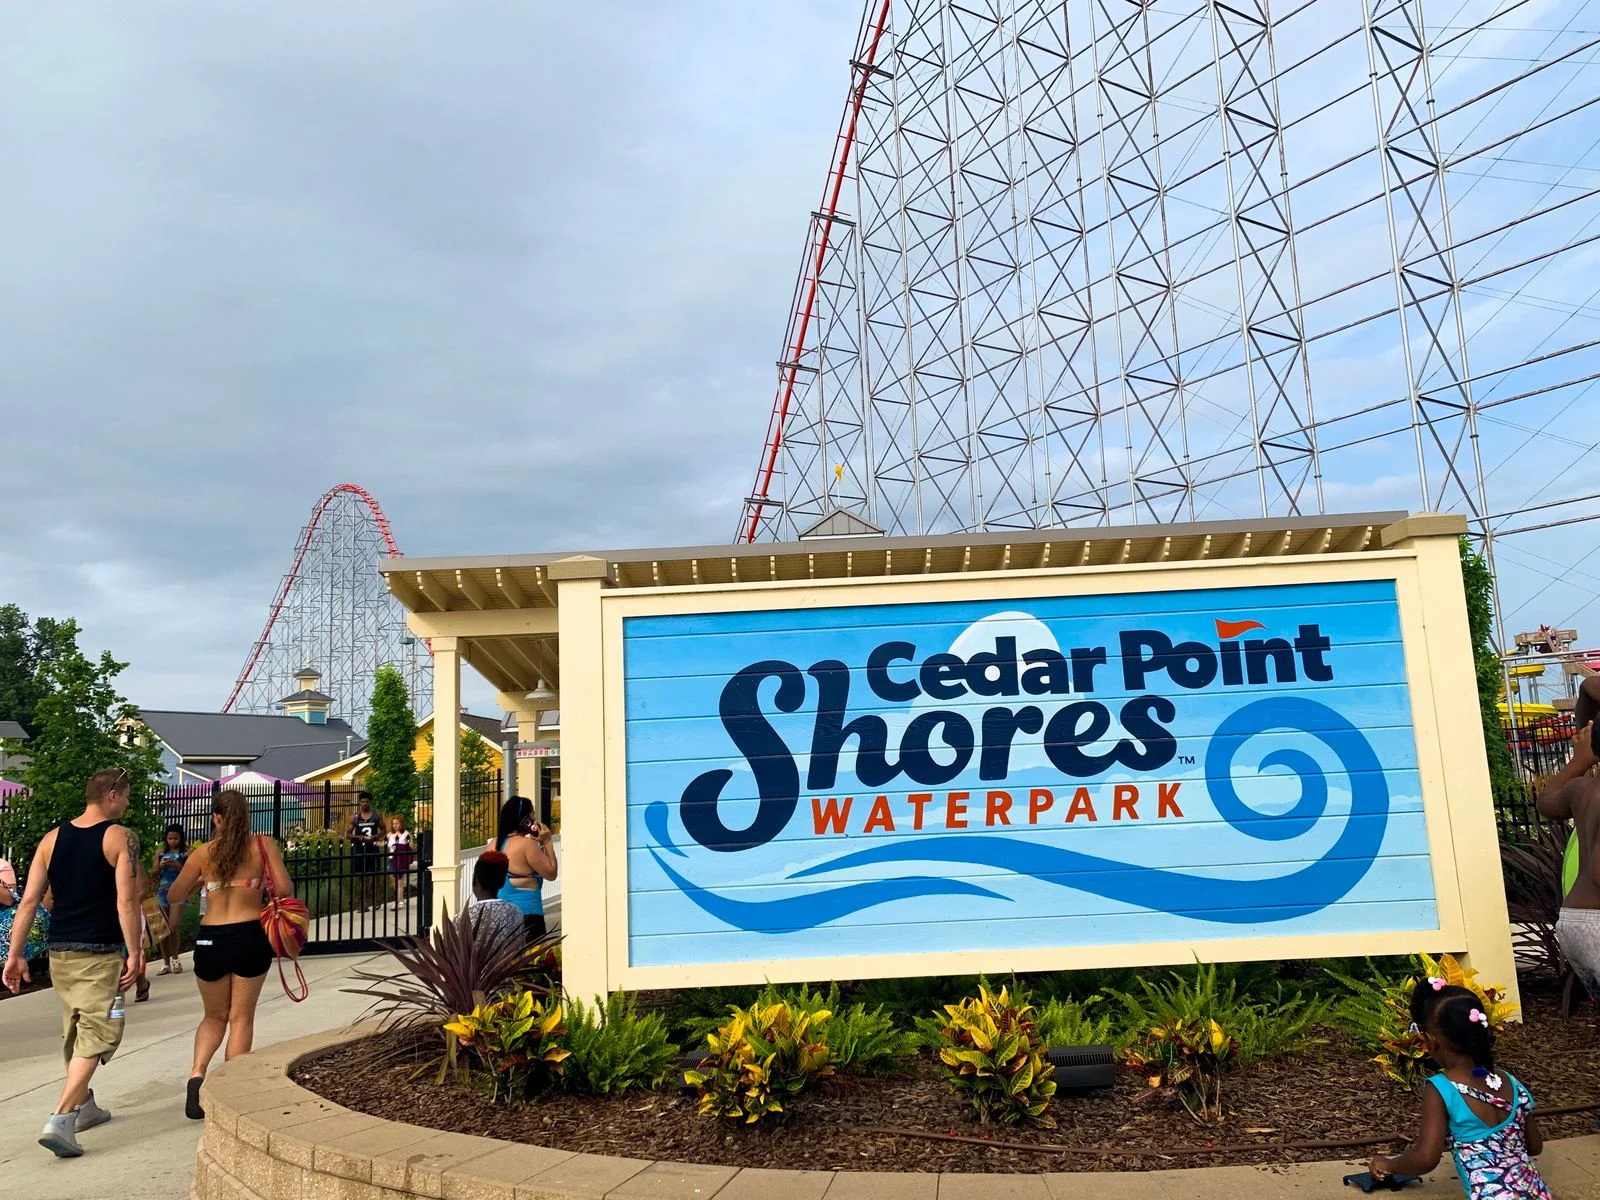 People in their summer outfit entering Cedar Point Shores Waterpark in Sandusky, OH, one of the best water parks in the USA, with a long roller coaster track in background and a child playing in front of Cedar Point Shores Waterpark signage 